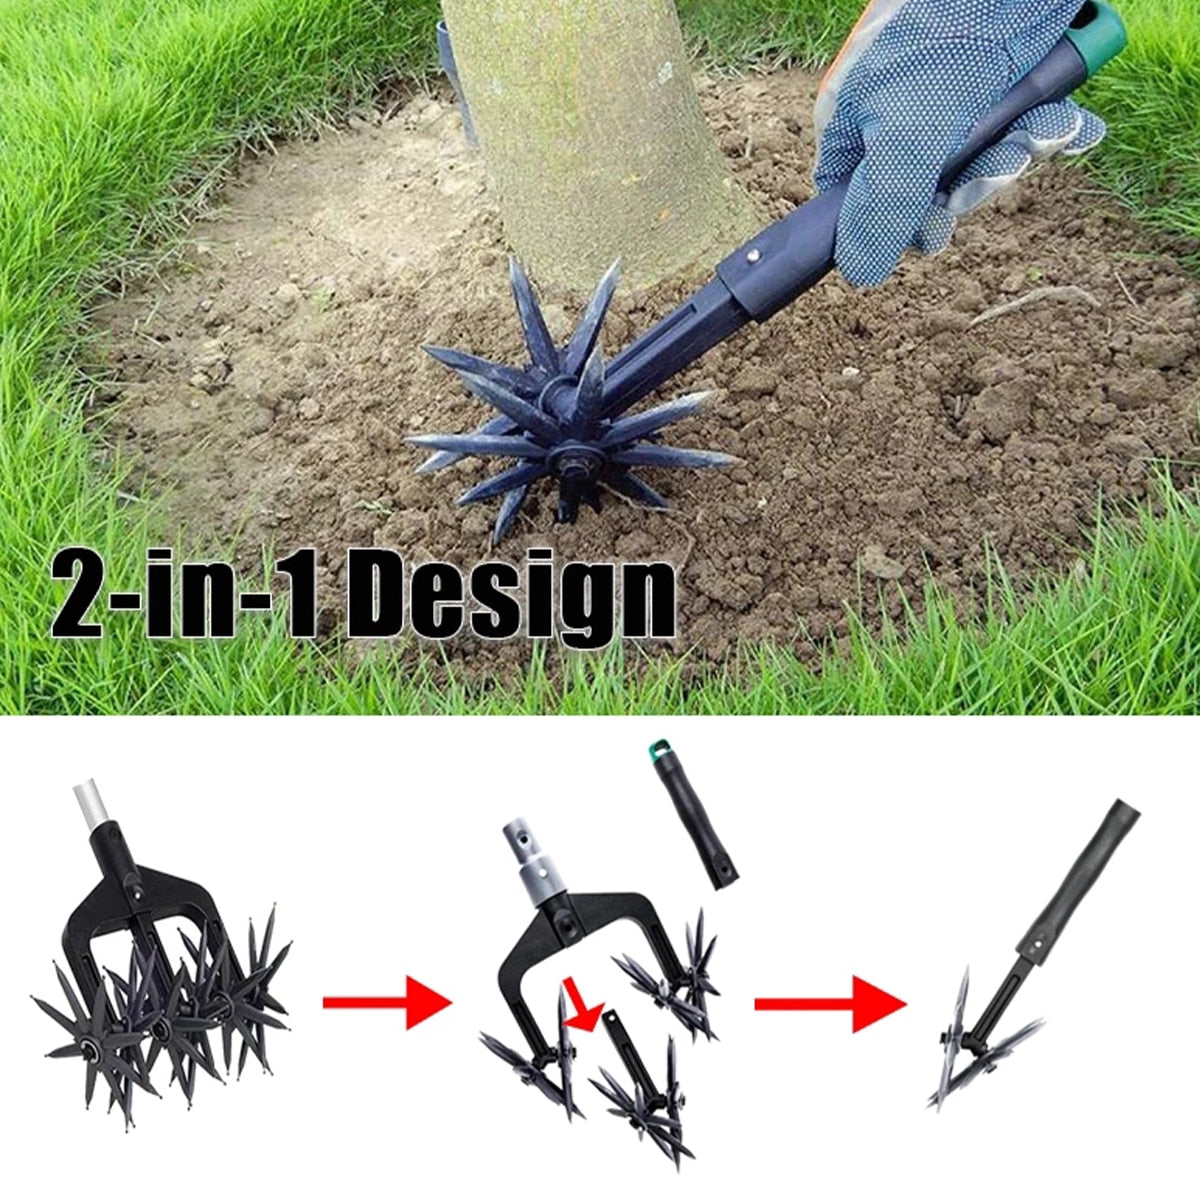 Garden Lawn Manual Rotary Tiller Grass Repair and Seed Cultivator with 6 Star Wheel Labor-Saving Practical Soil Turning Tool - youronestopstore23